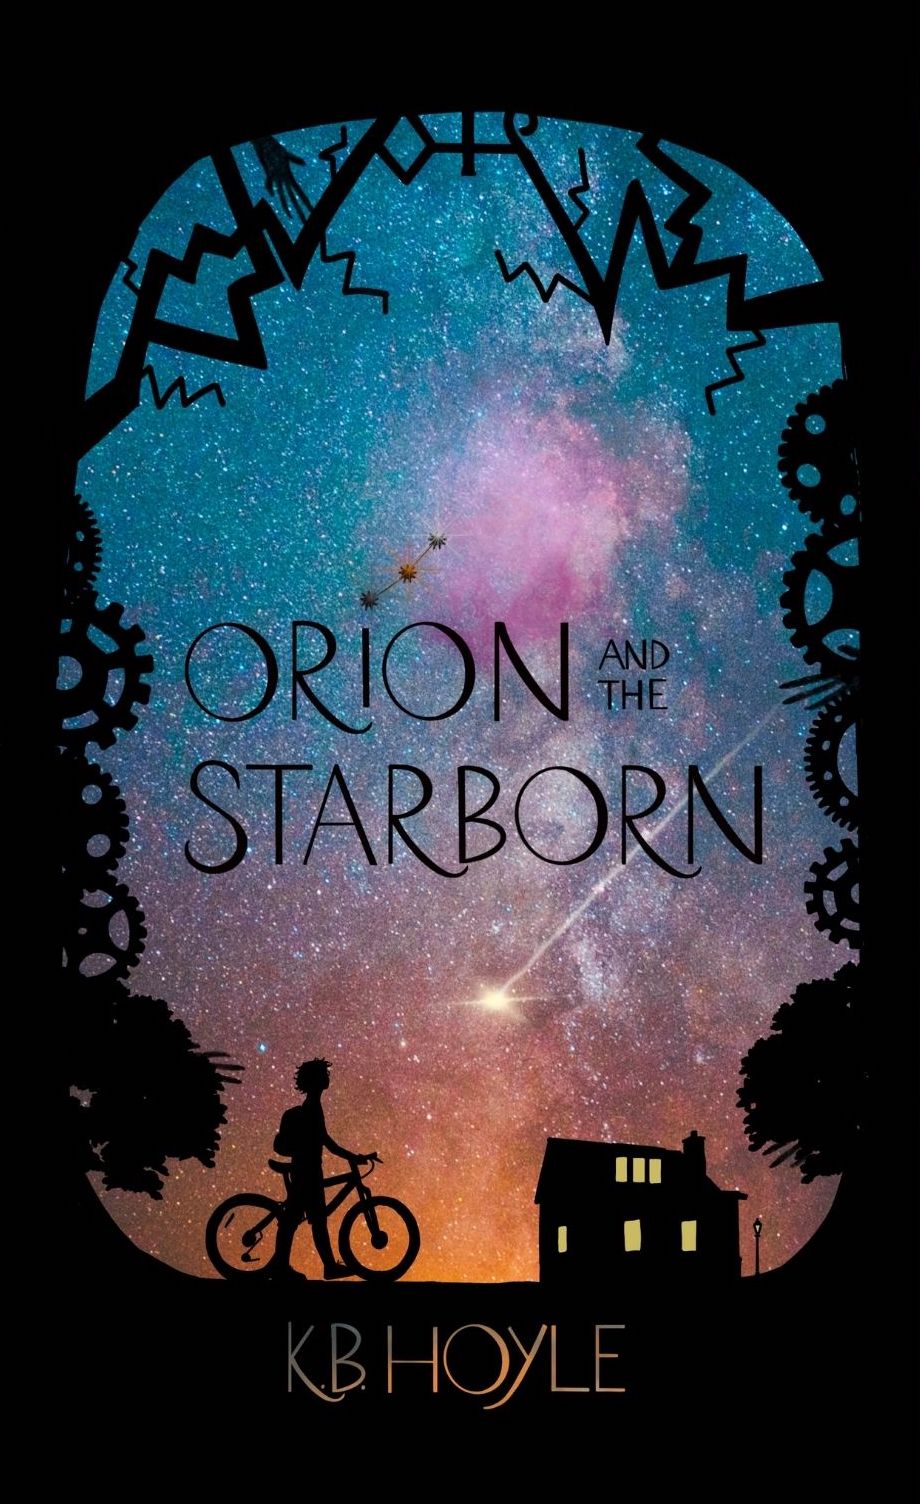 Orion and the Starborn – A Book Review